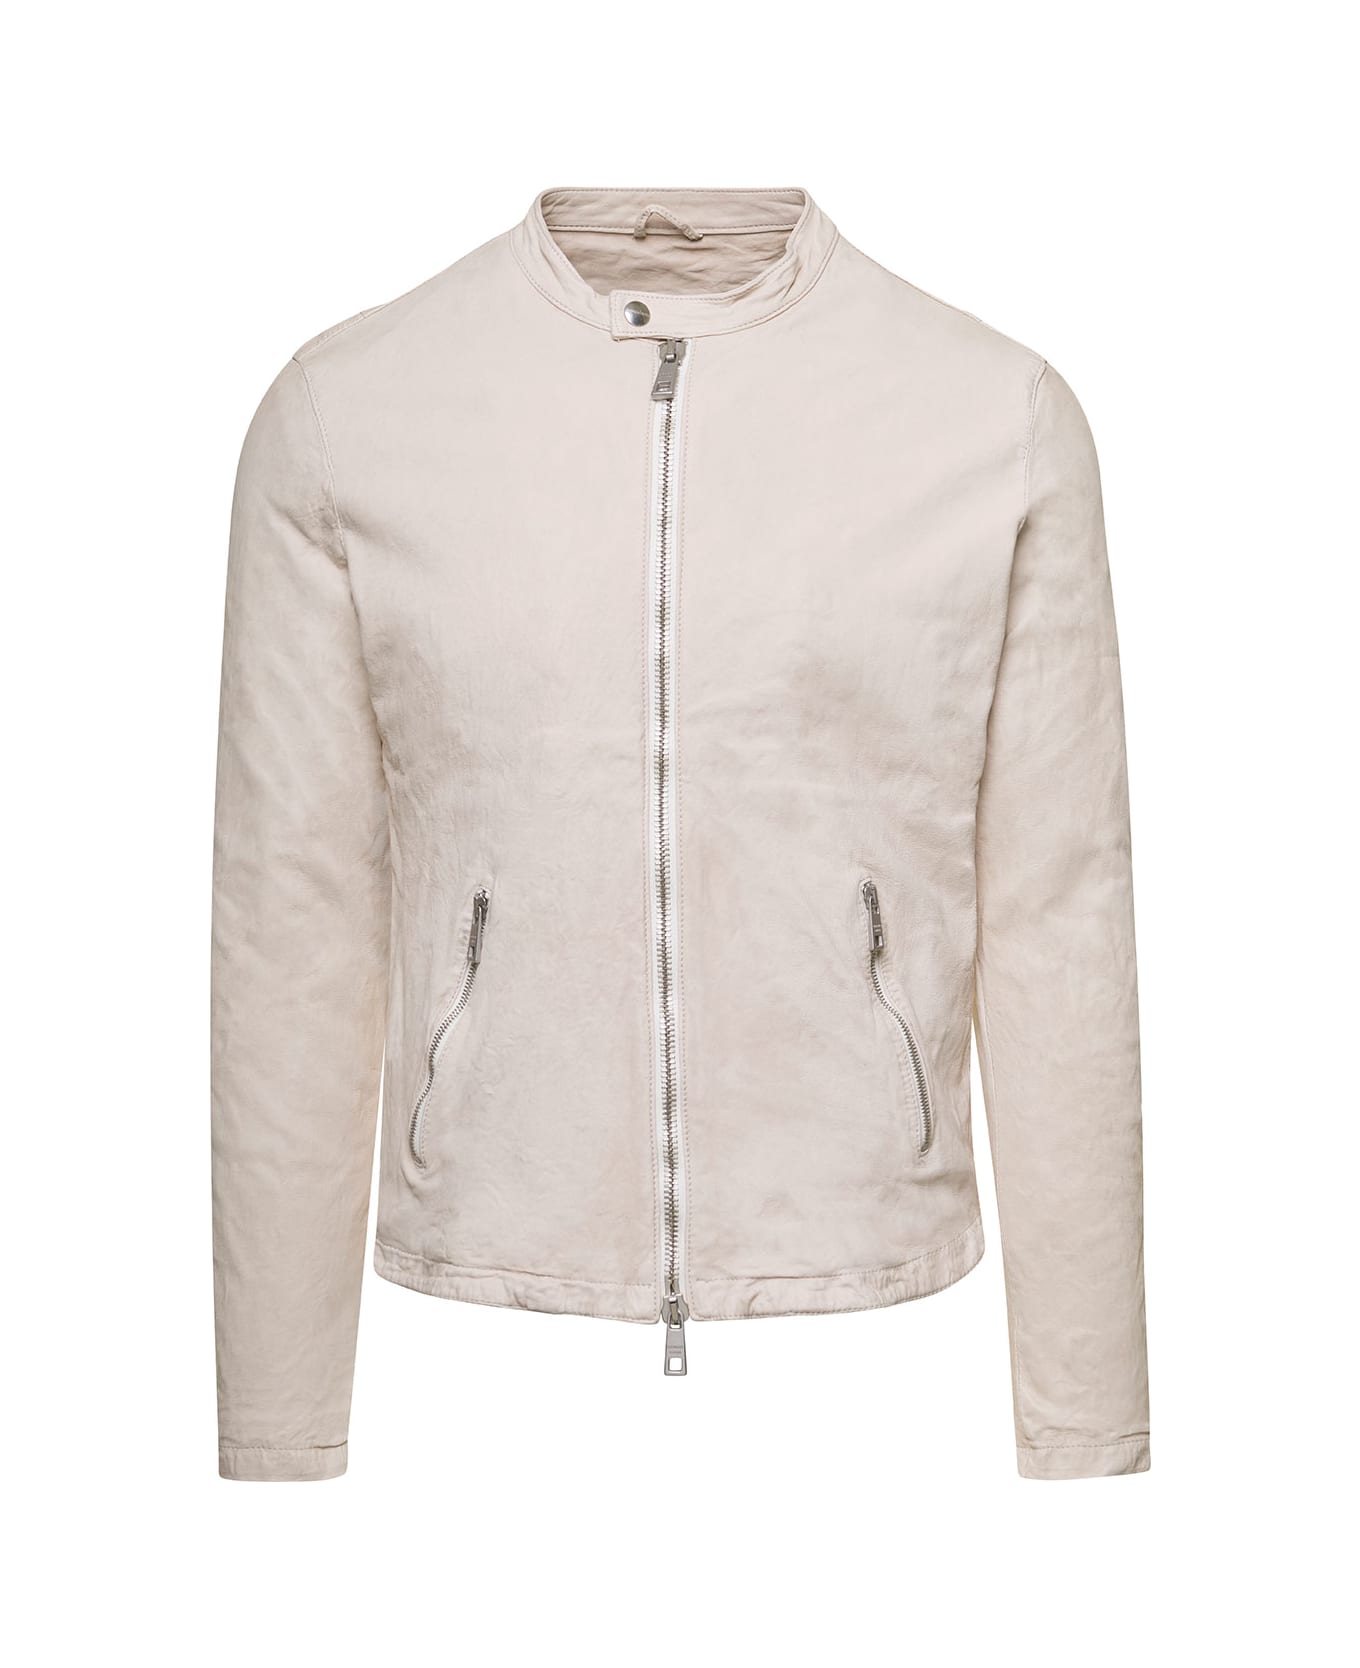 Giorgio Brato Beige Jacket With Two-way Zip In Leather Man - Beige